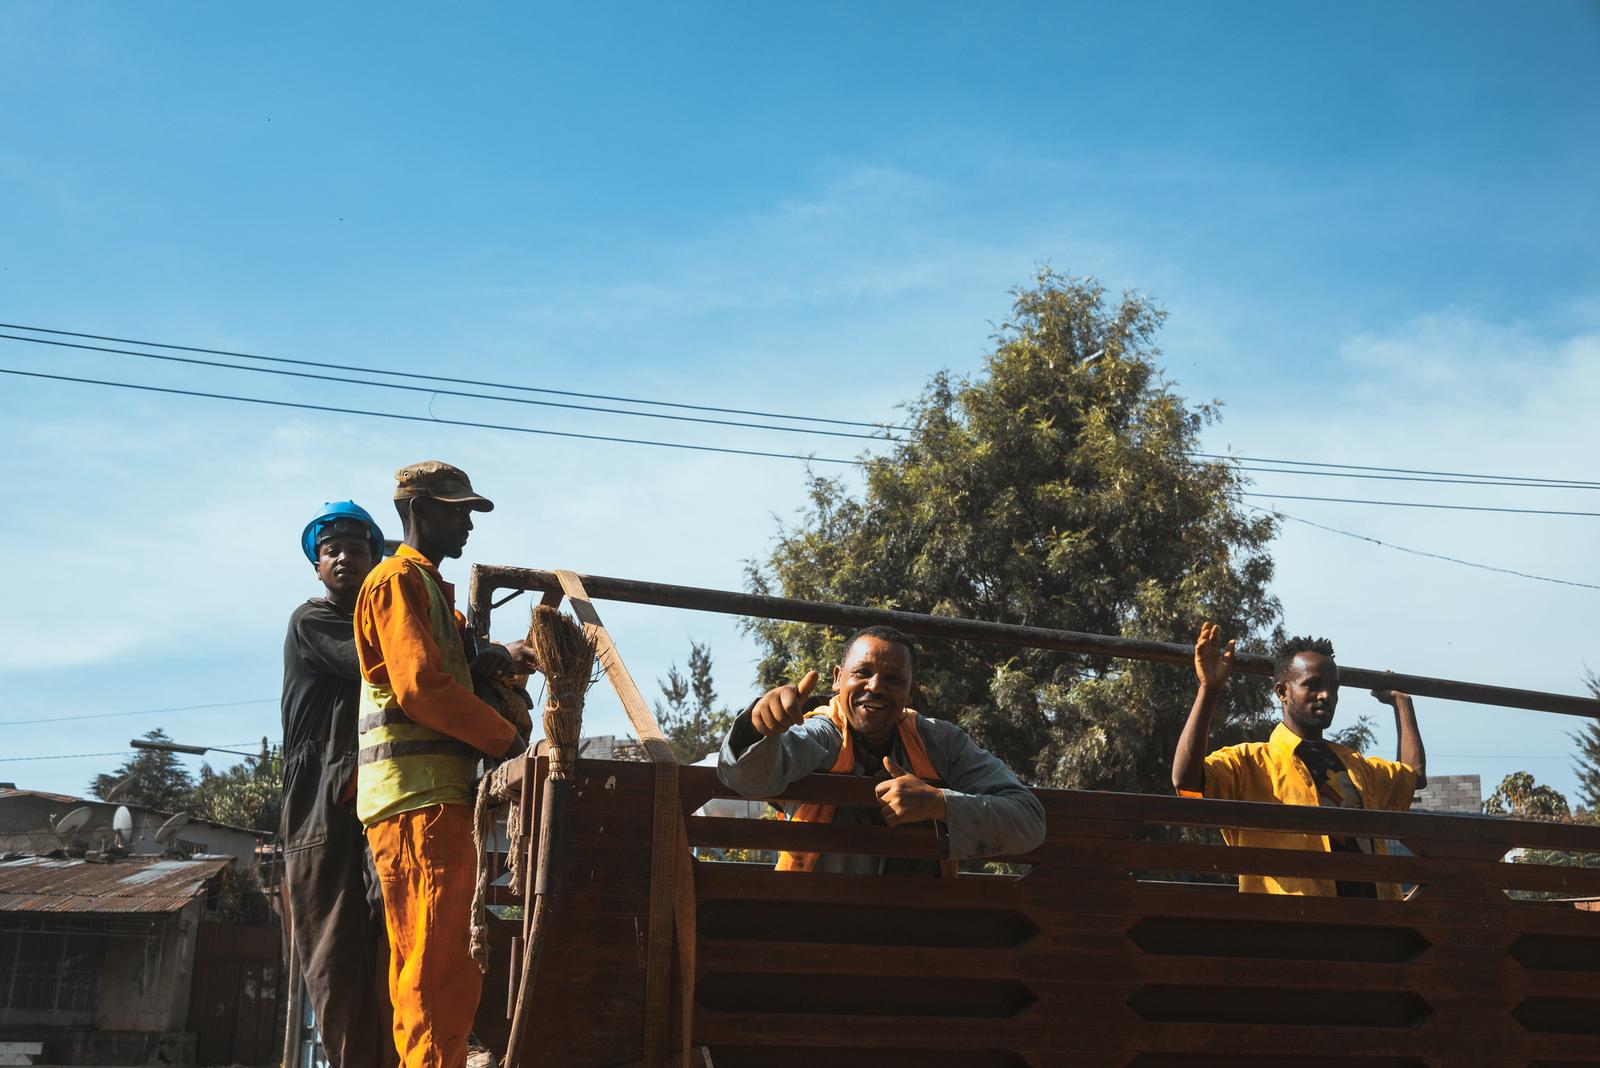 People in Addis Ababa